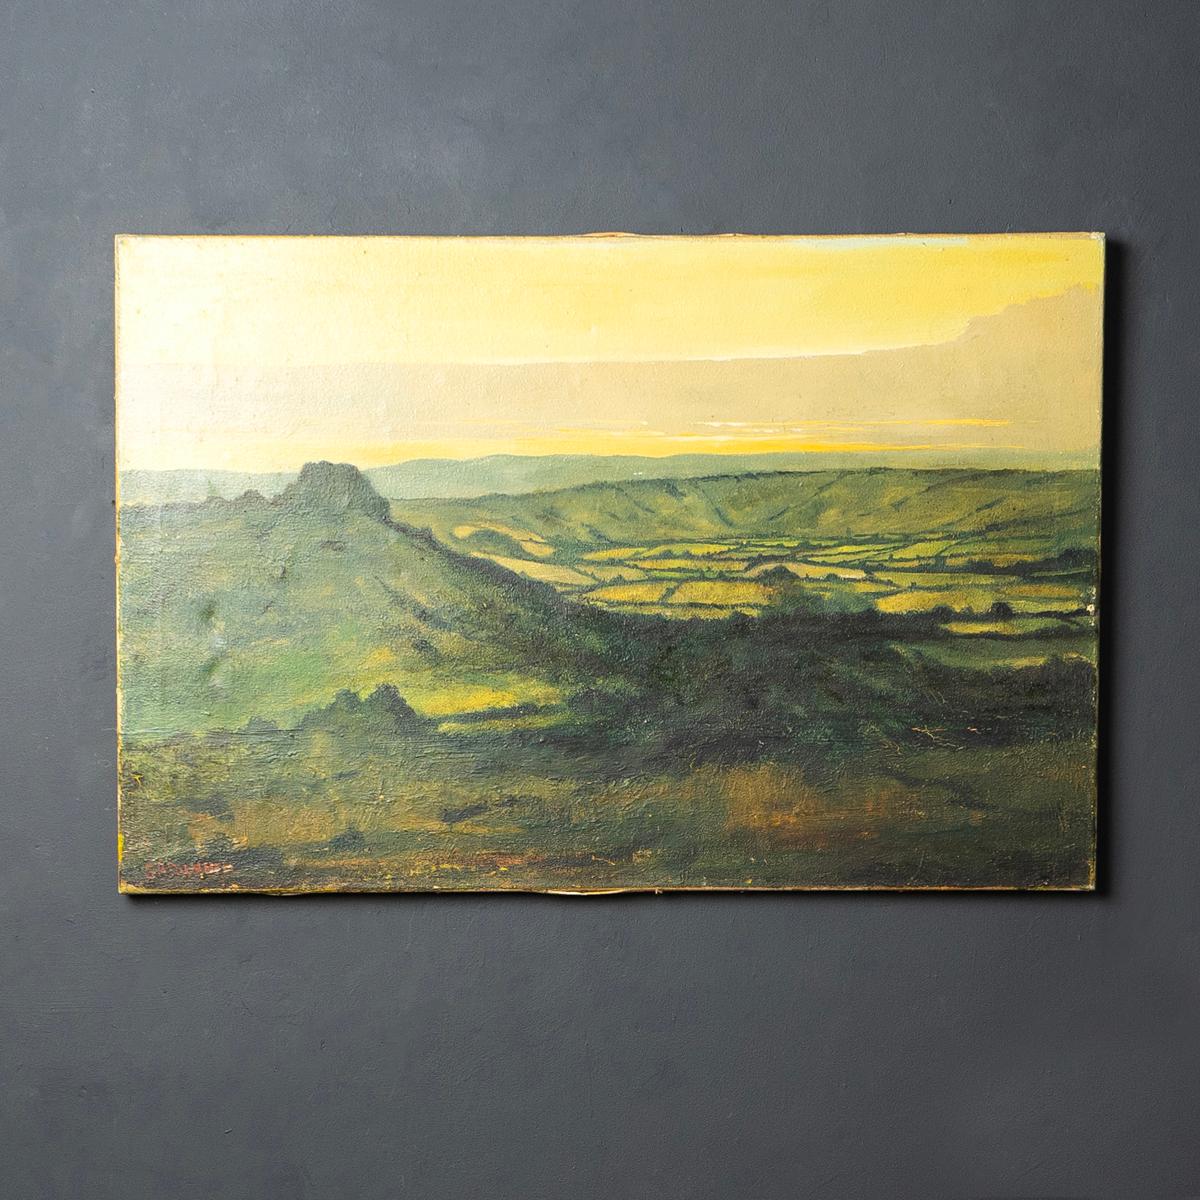 Antique Original Oil Painting Depicting a Hilly Countryside Scene

A dramatic landscape, instantly made me think of the Brecon Beacons.

A patchwork of green fields in a valley by a mountainous outcrop, executed in a familiar, slightly naive style